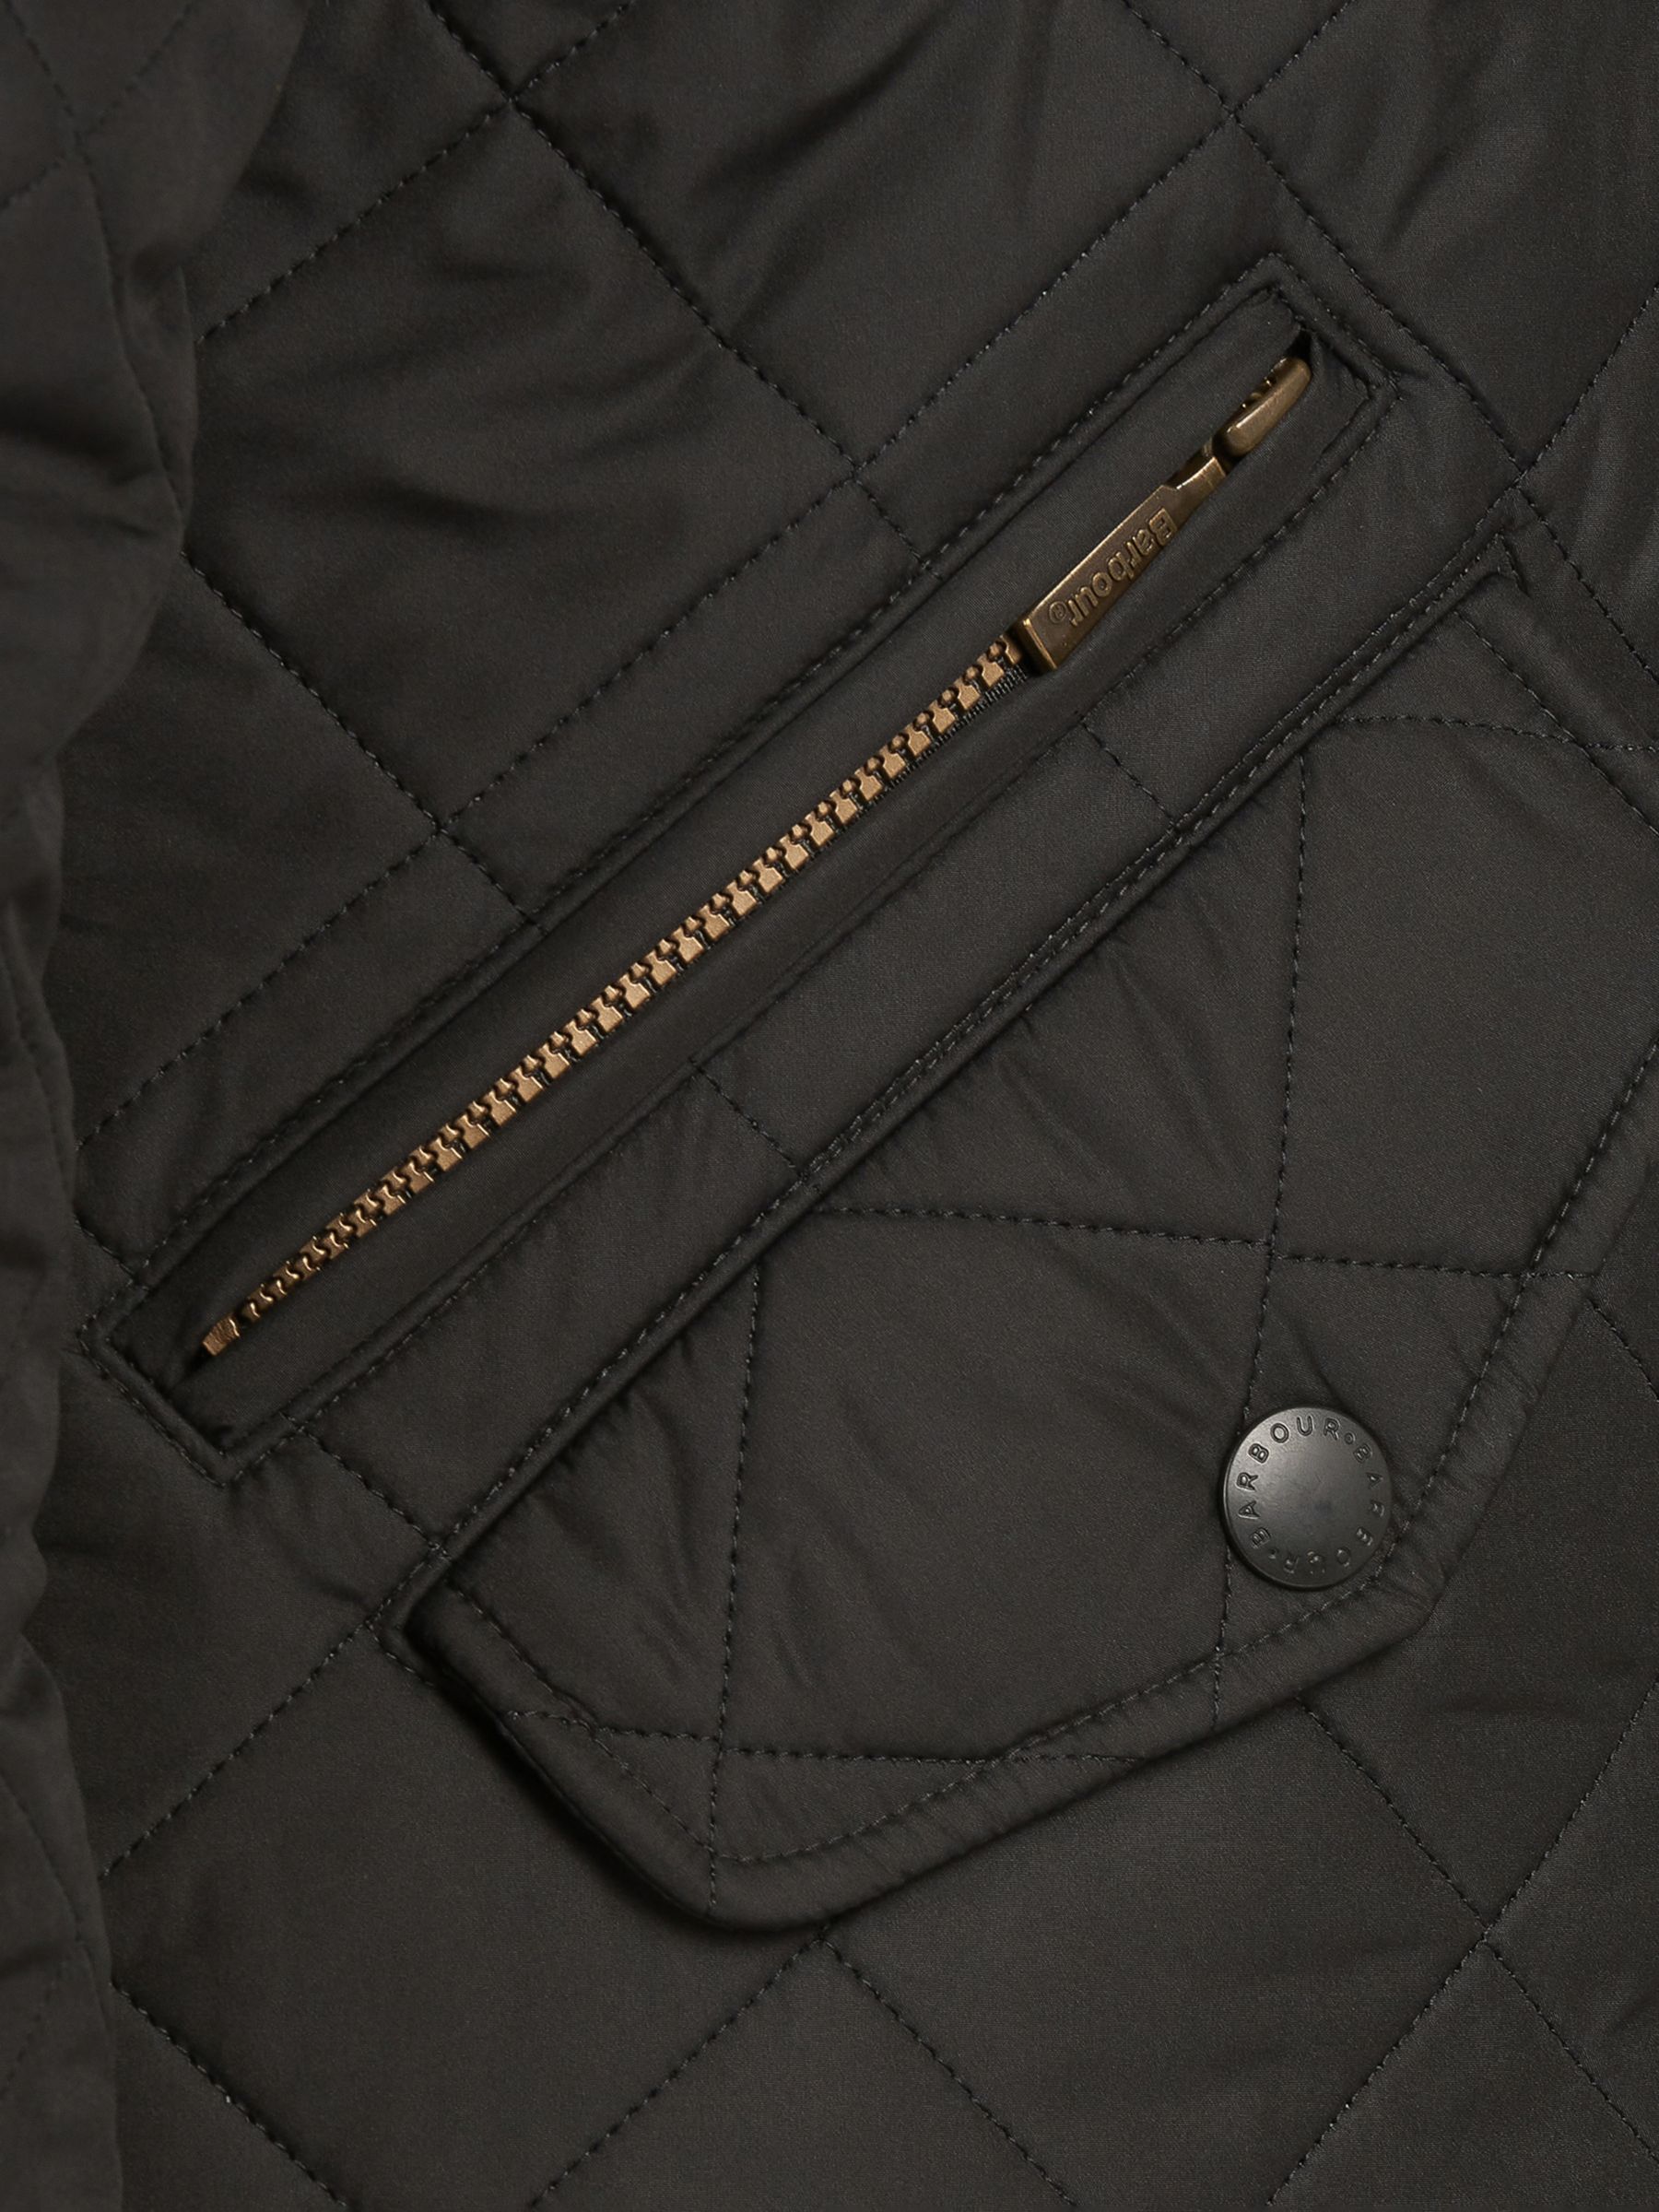 Barbour Powell Quilted Jacket, Black, M